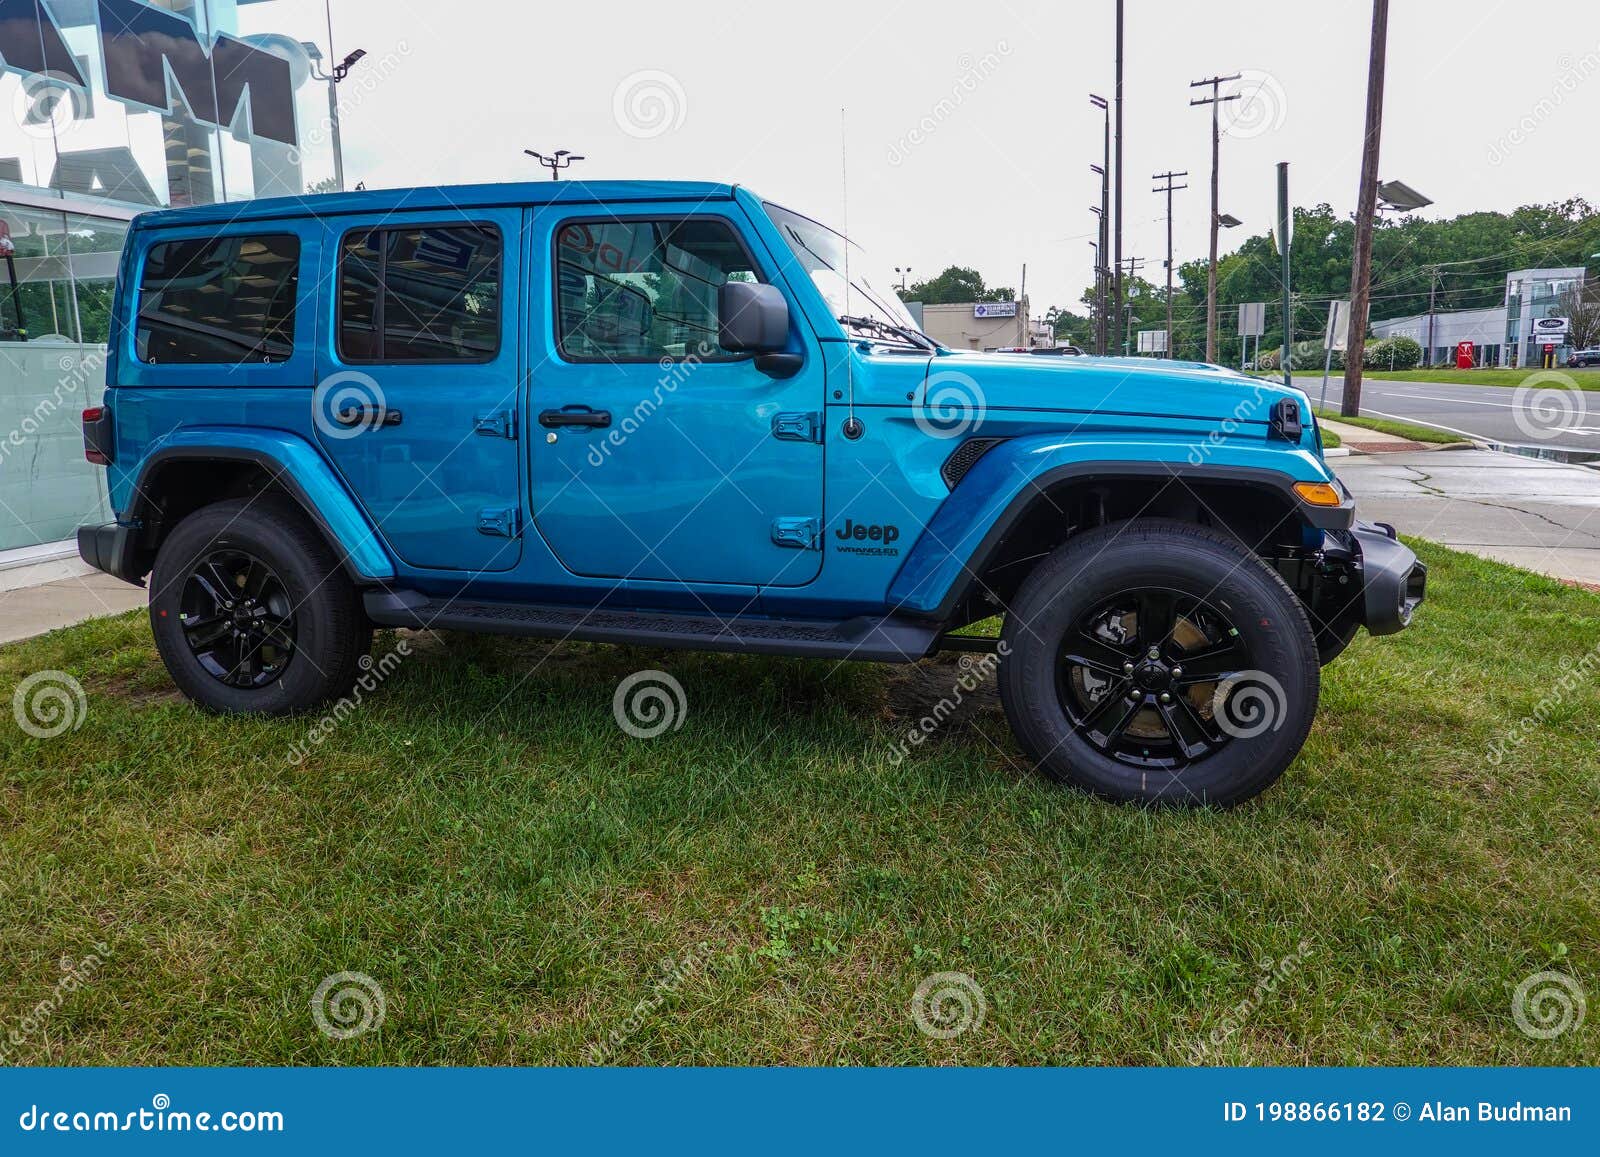 5 176 Blue Jeep Photos Free Royalty Free Stock Photos From Dreamstime